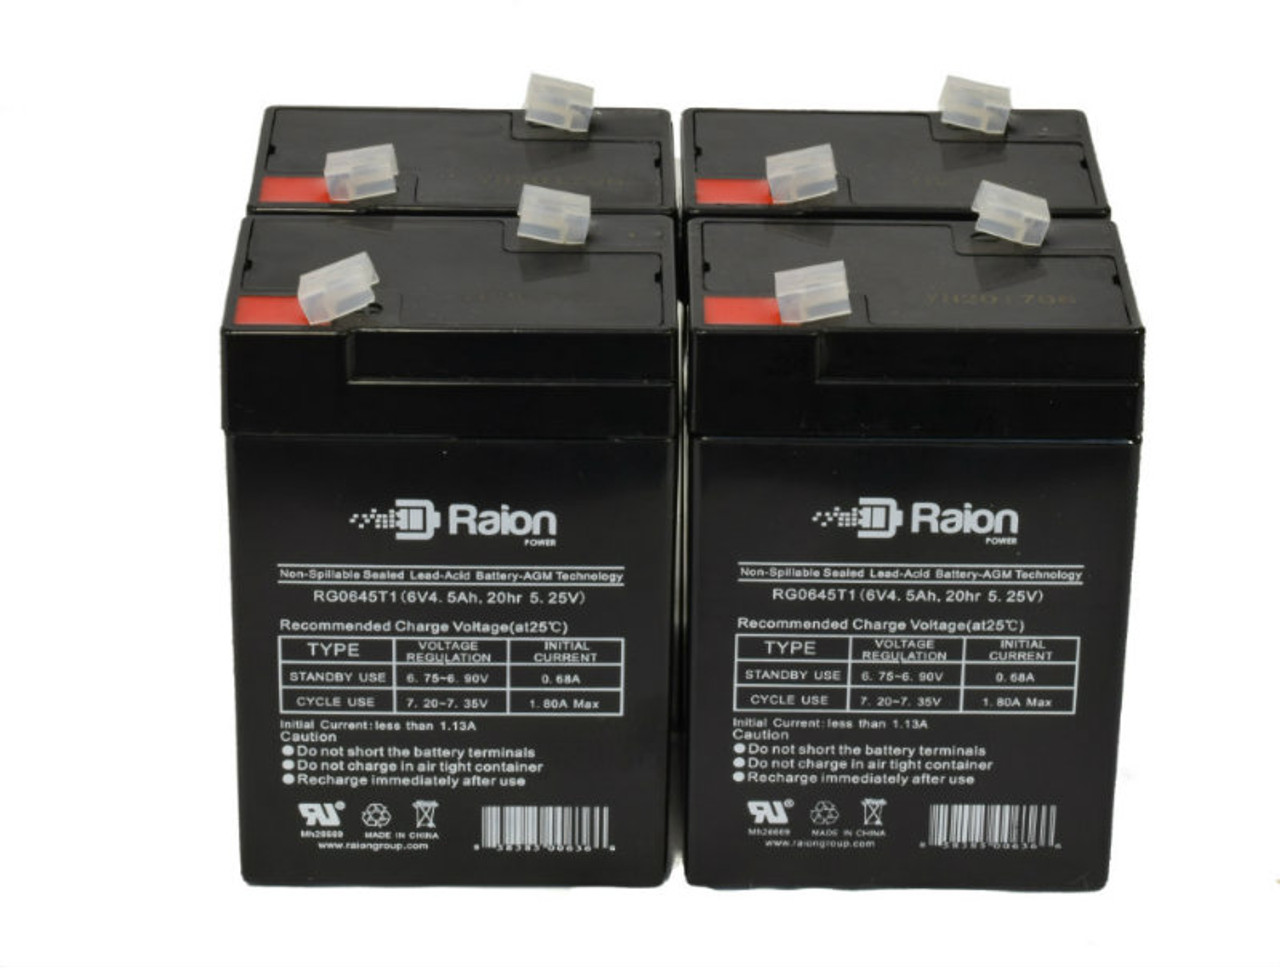 Raion Power 6 Volt 4.5Ah RG0645T1 Replacement Battery for SBB 3FM4 - 4 Pack